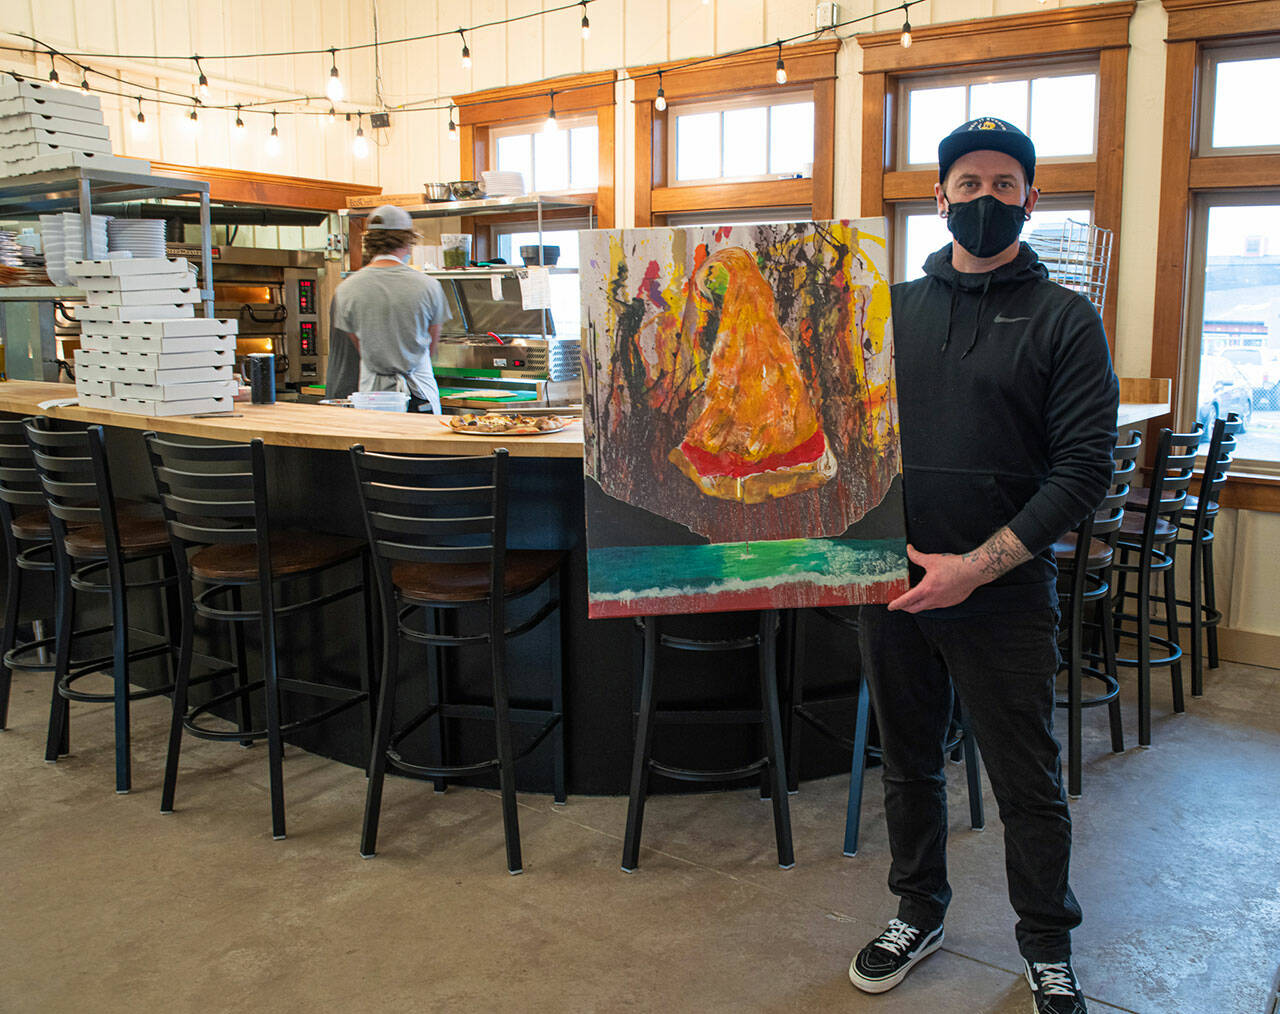 Larry White, district manager for Barhop Brewing & Artisan Pizza and artist, holds a painting for Barhop's new Sequim location.Behind him, kitchen manager Jeffrey Adams prepares pizzas for customers in the open kitchen. (Emily Matthiessen/Olympic Peninsula News Group)